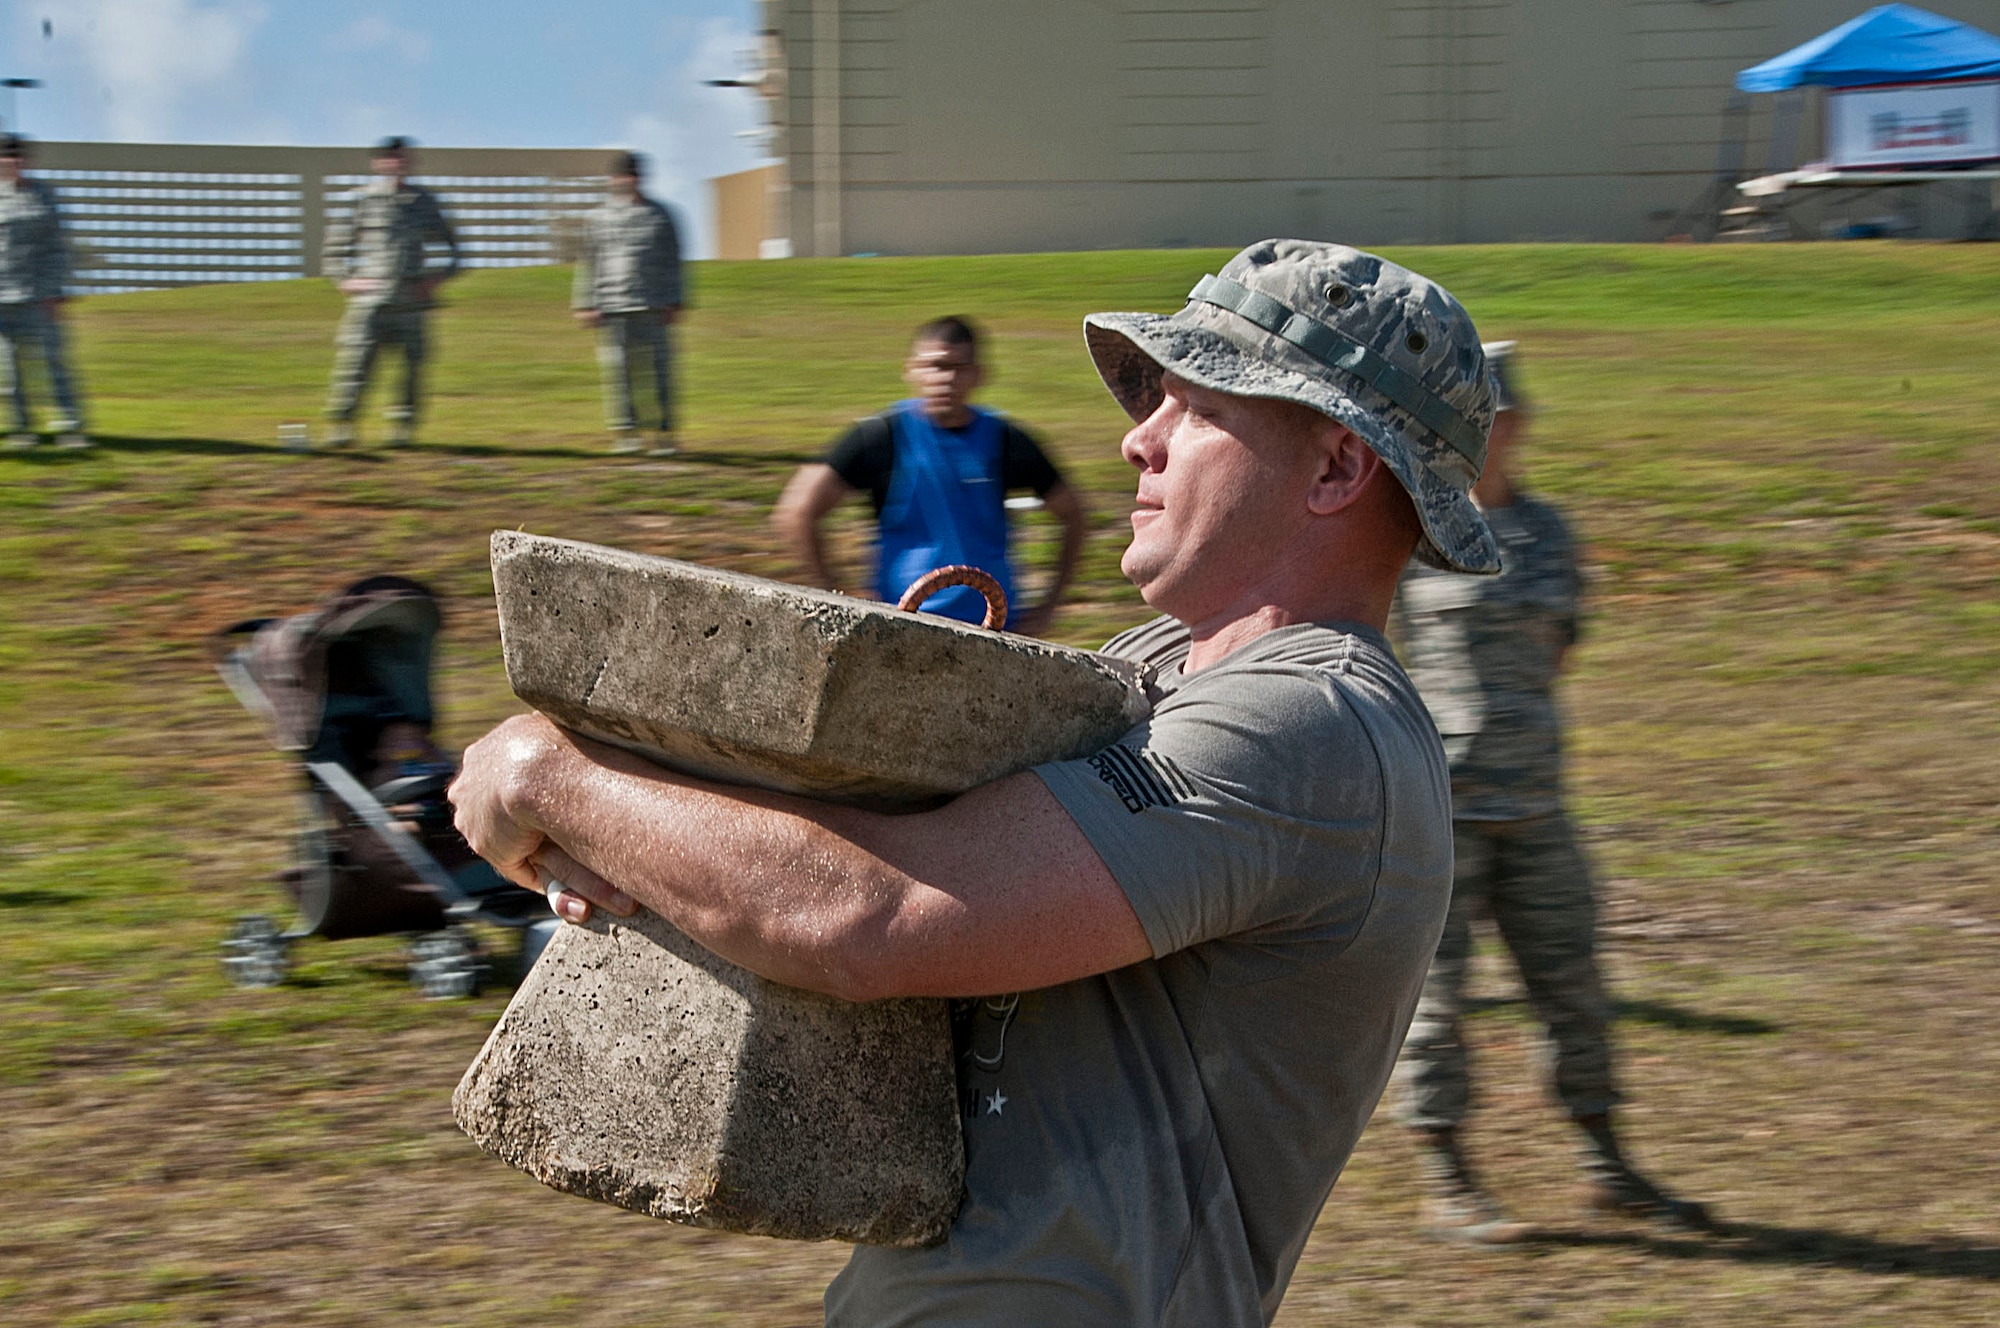 1st Lt. Brian Slater, 36th Security Forces Squadron assistant operations officer, runs with a cement block in the Strongman Competition at Andersen Air Force Base, Guam, May 15, 2013. The Strongman Competition was held in honor of National Police Week which occurs each year during the week of May 15 in recognition of the service and sacrifice of members of U.S. law enforcement agencies. (U.S. Air Force photo by Airman 1st Class Adarius Petty/Released)